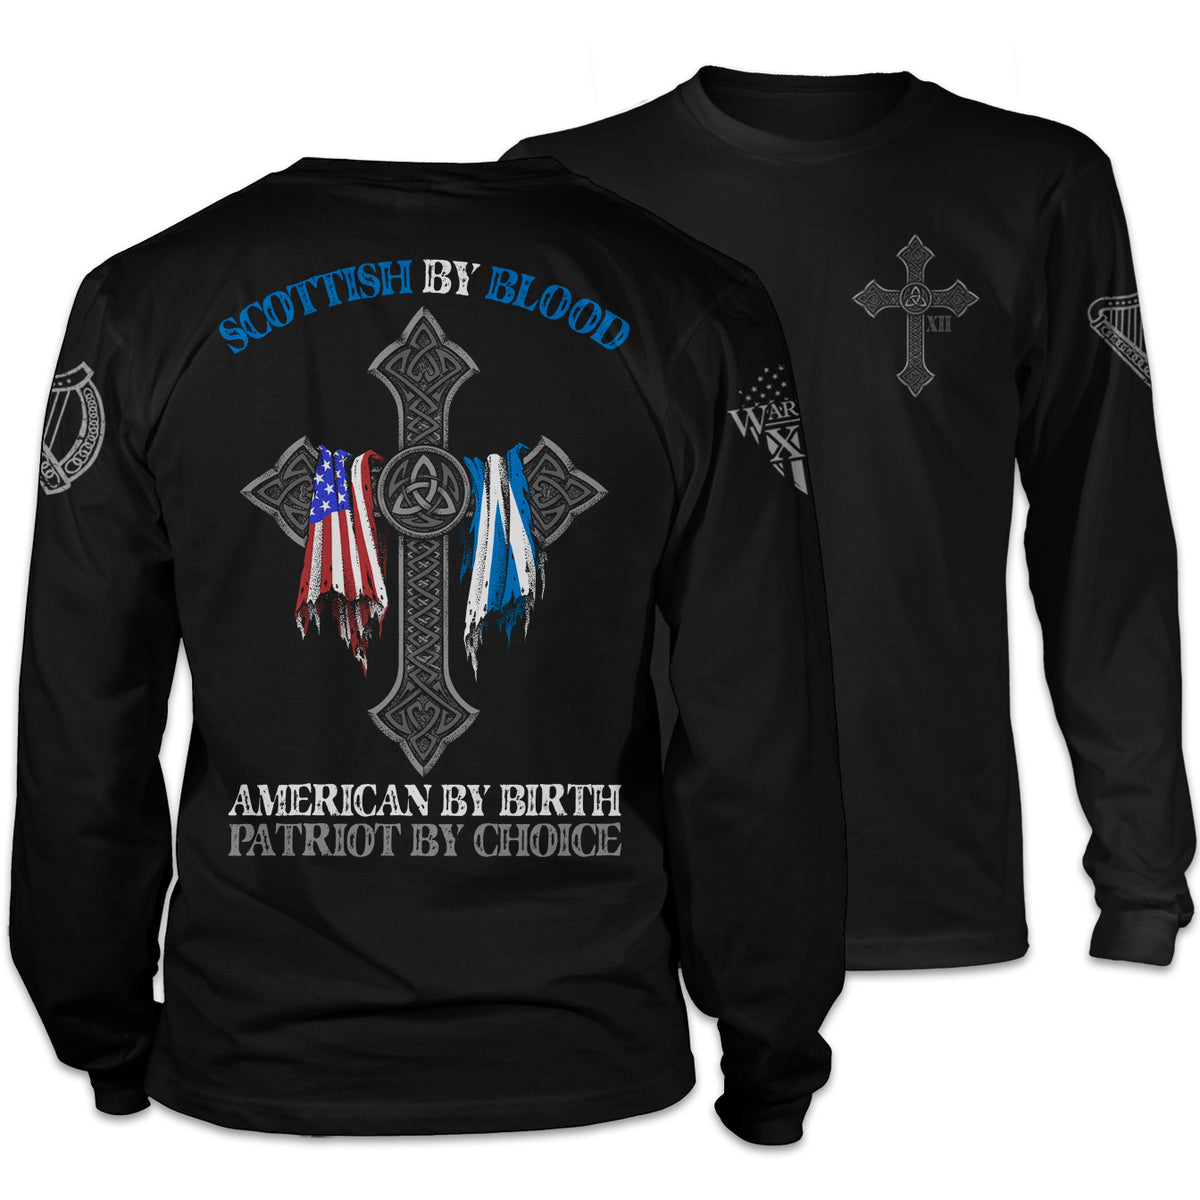 Front and back black long sleeve shirt with the words "Scottish by blood, American by birth, patriot by choice" with a cross holding the American and Scottish flag printed on the shirt.